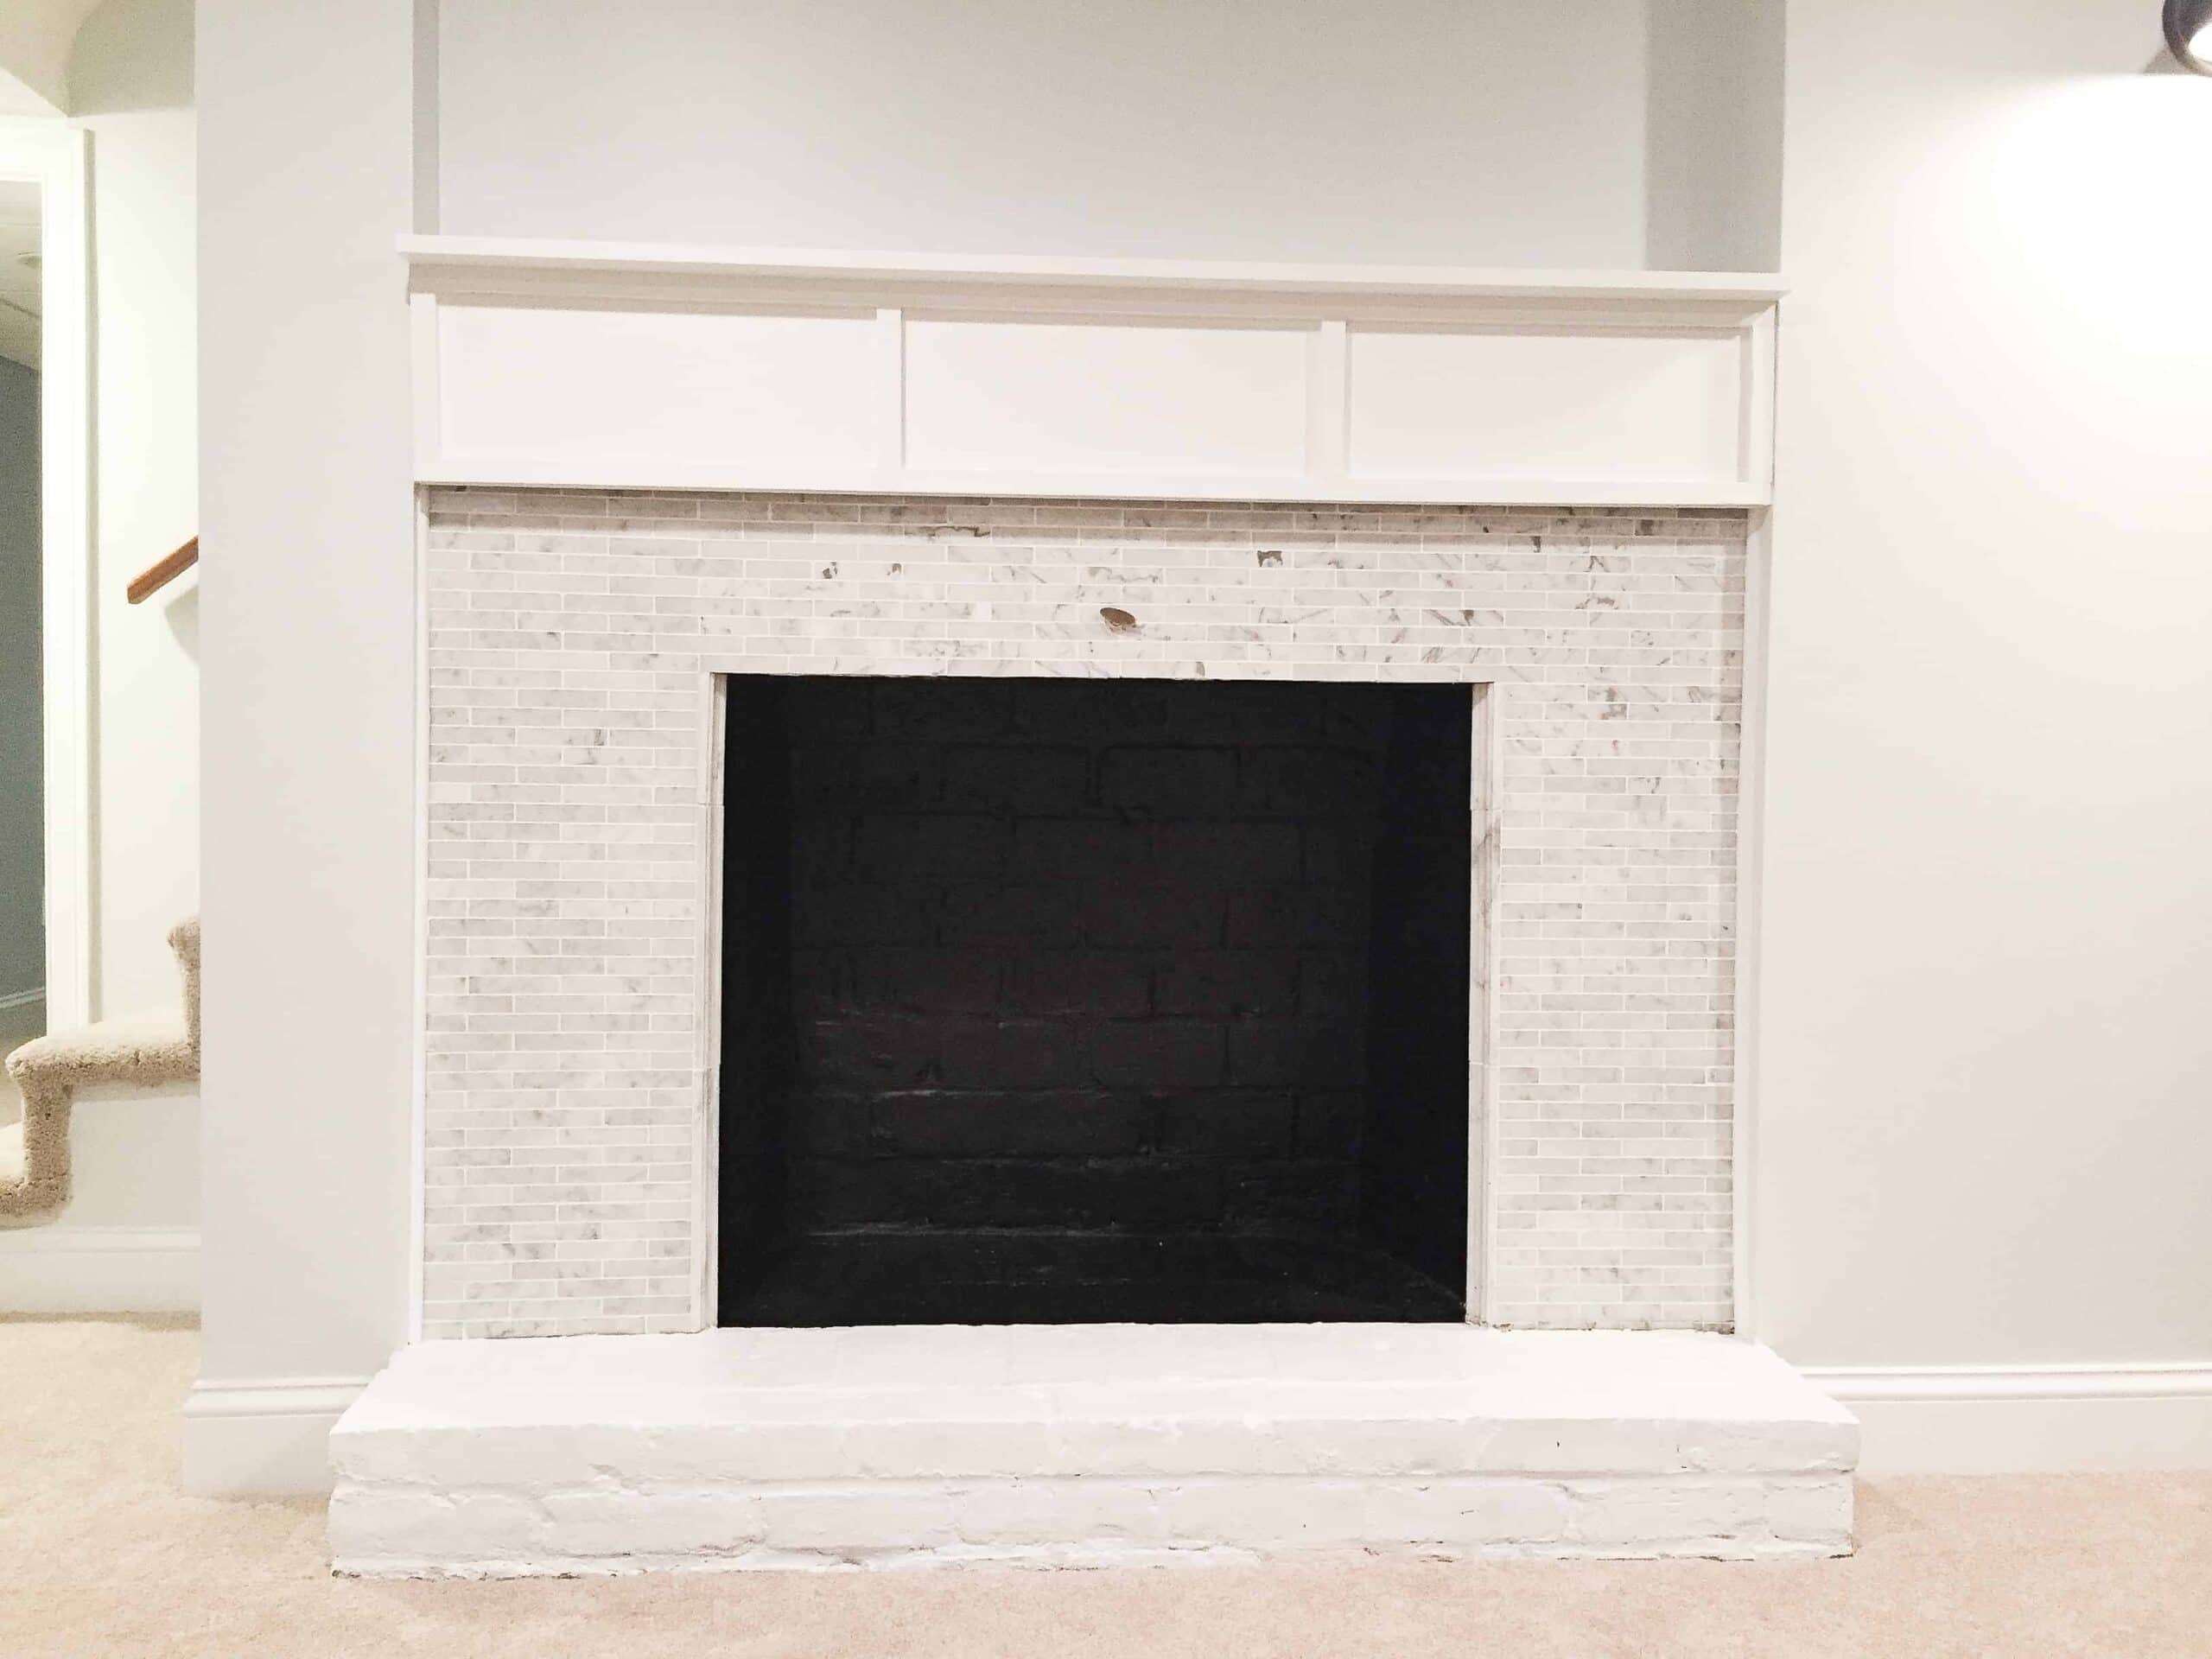 A basement fireplace with a white mantel, a tile surround and the firebox painted black, with a white painted stone hearth